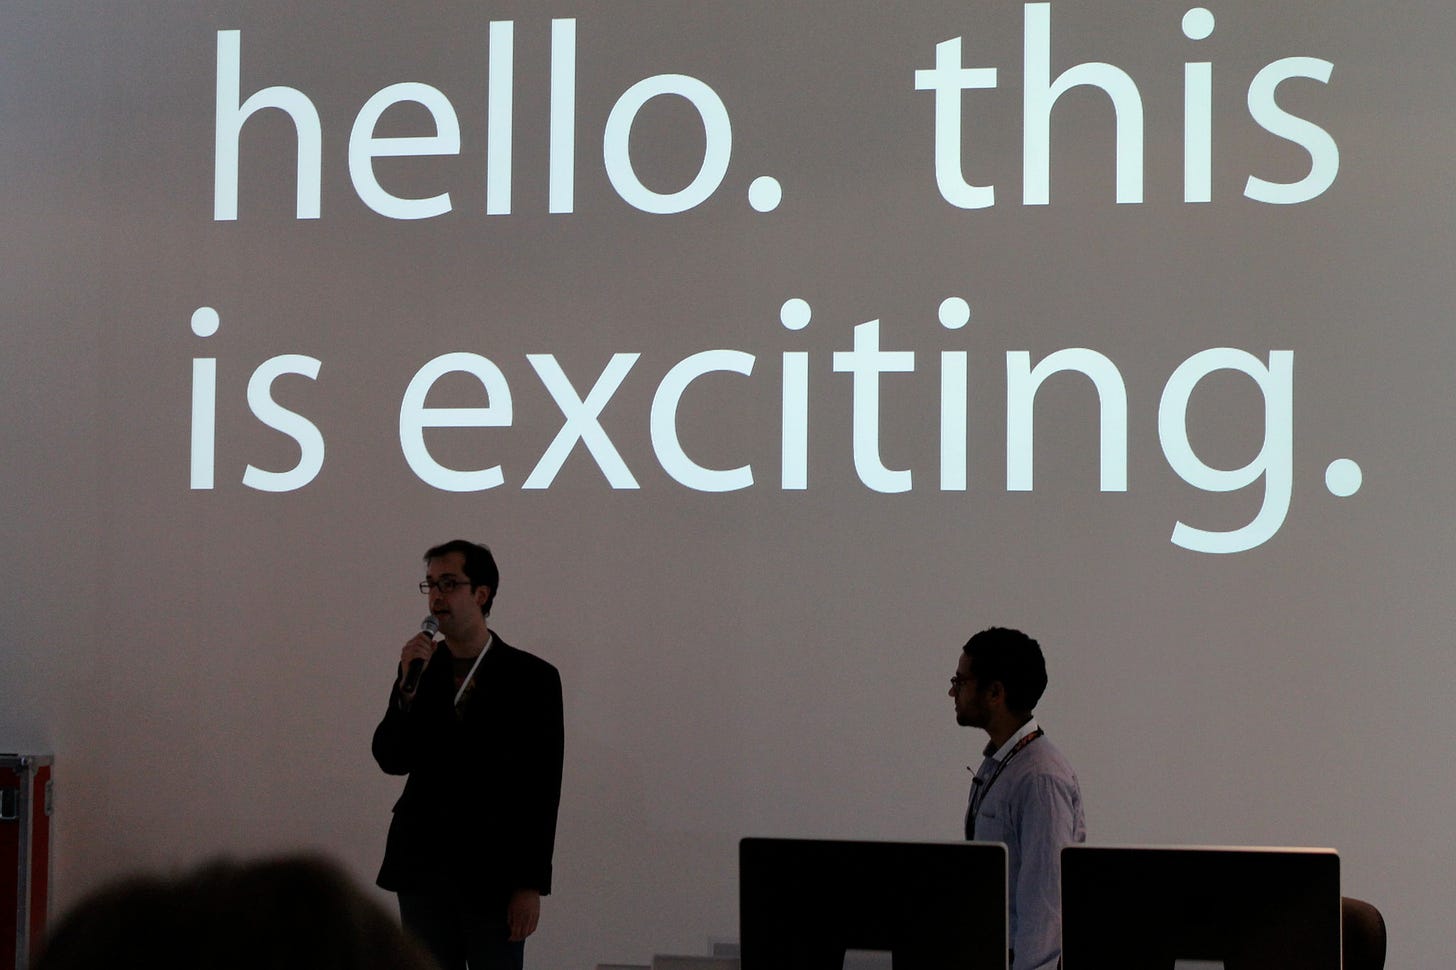 A photo of two people standing in front of a large screen projecting the words: "hello. this is exciting."